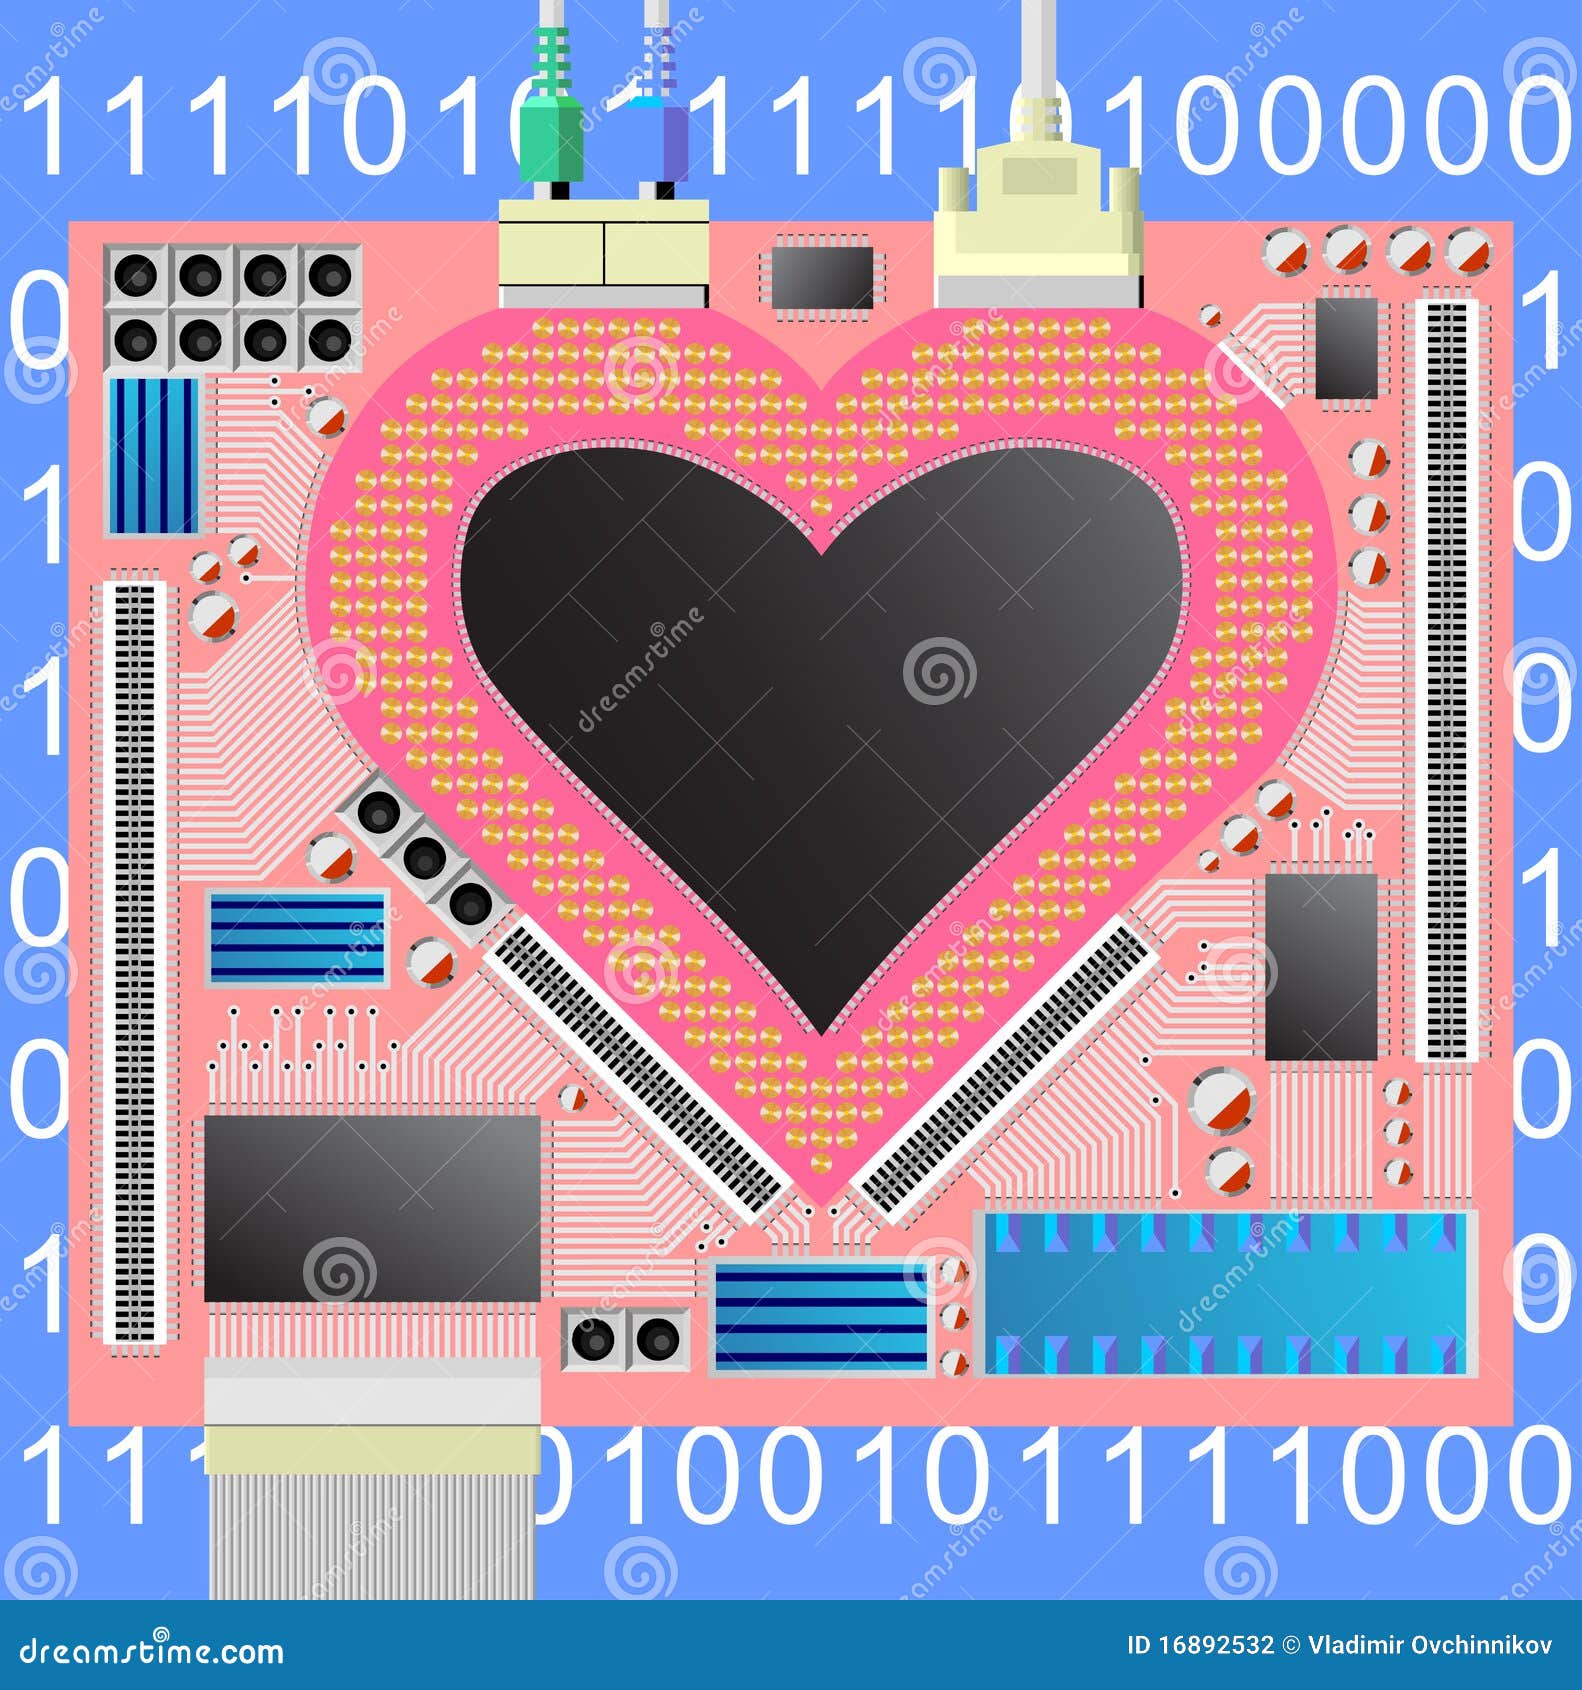 Albums 96+ Images what is the heart of a computer Stunning